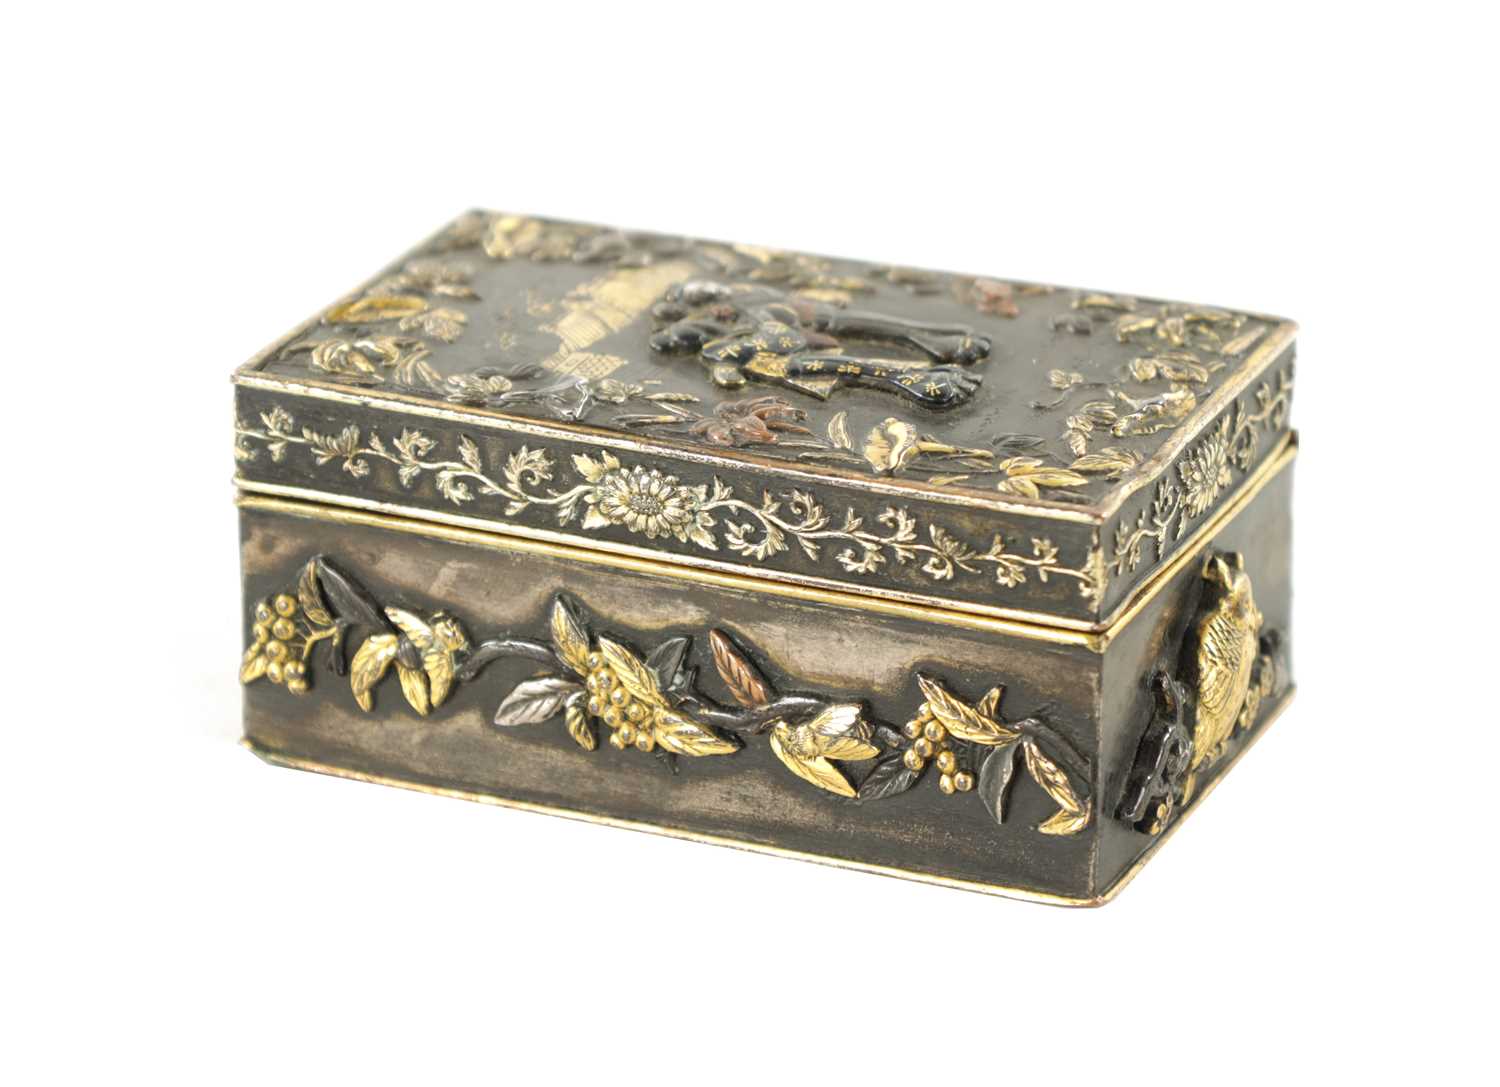 Lot 521 - A SMALL JAPANESE MEIJI PERIOD GOLD INLAID MIXED METAL BRONZE BOX